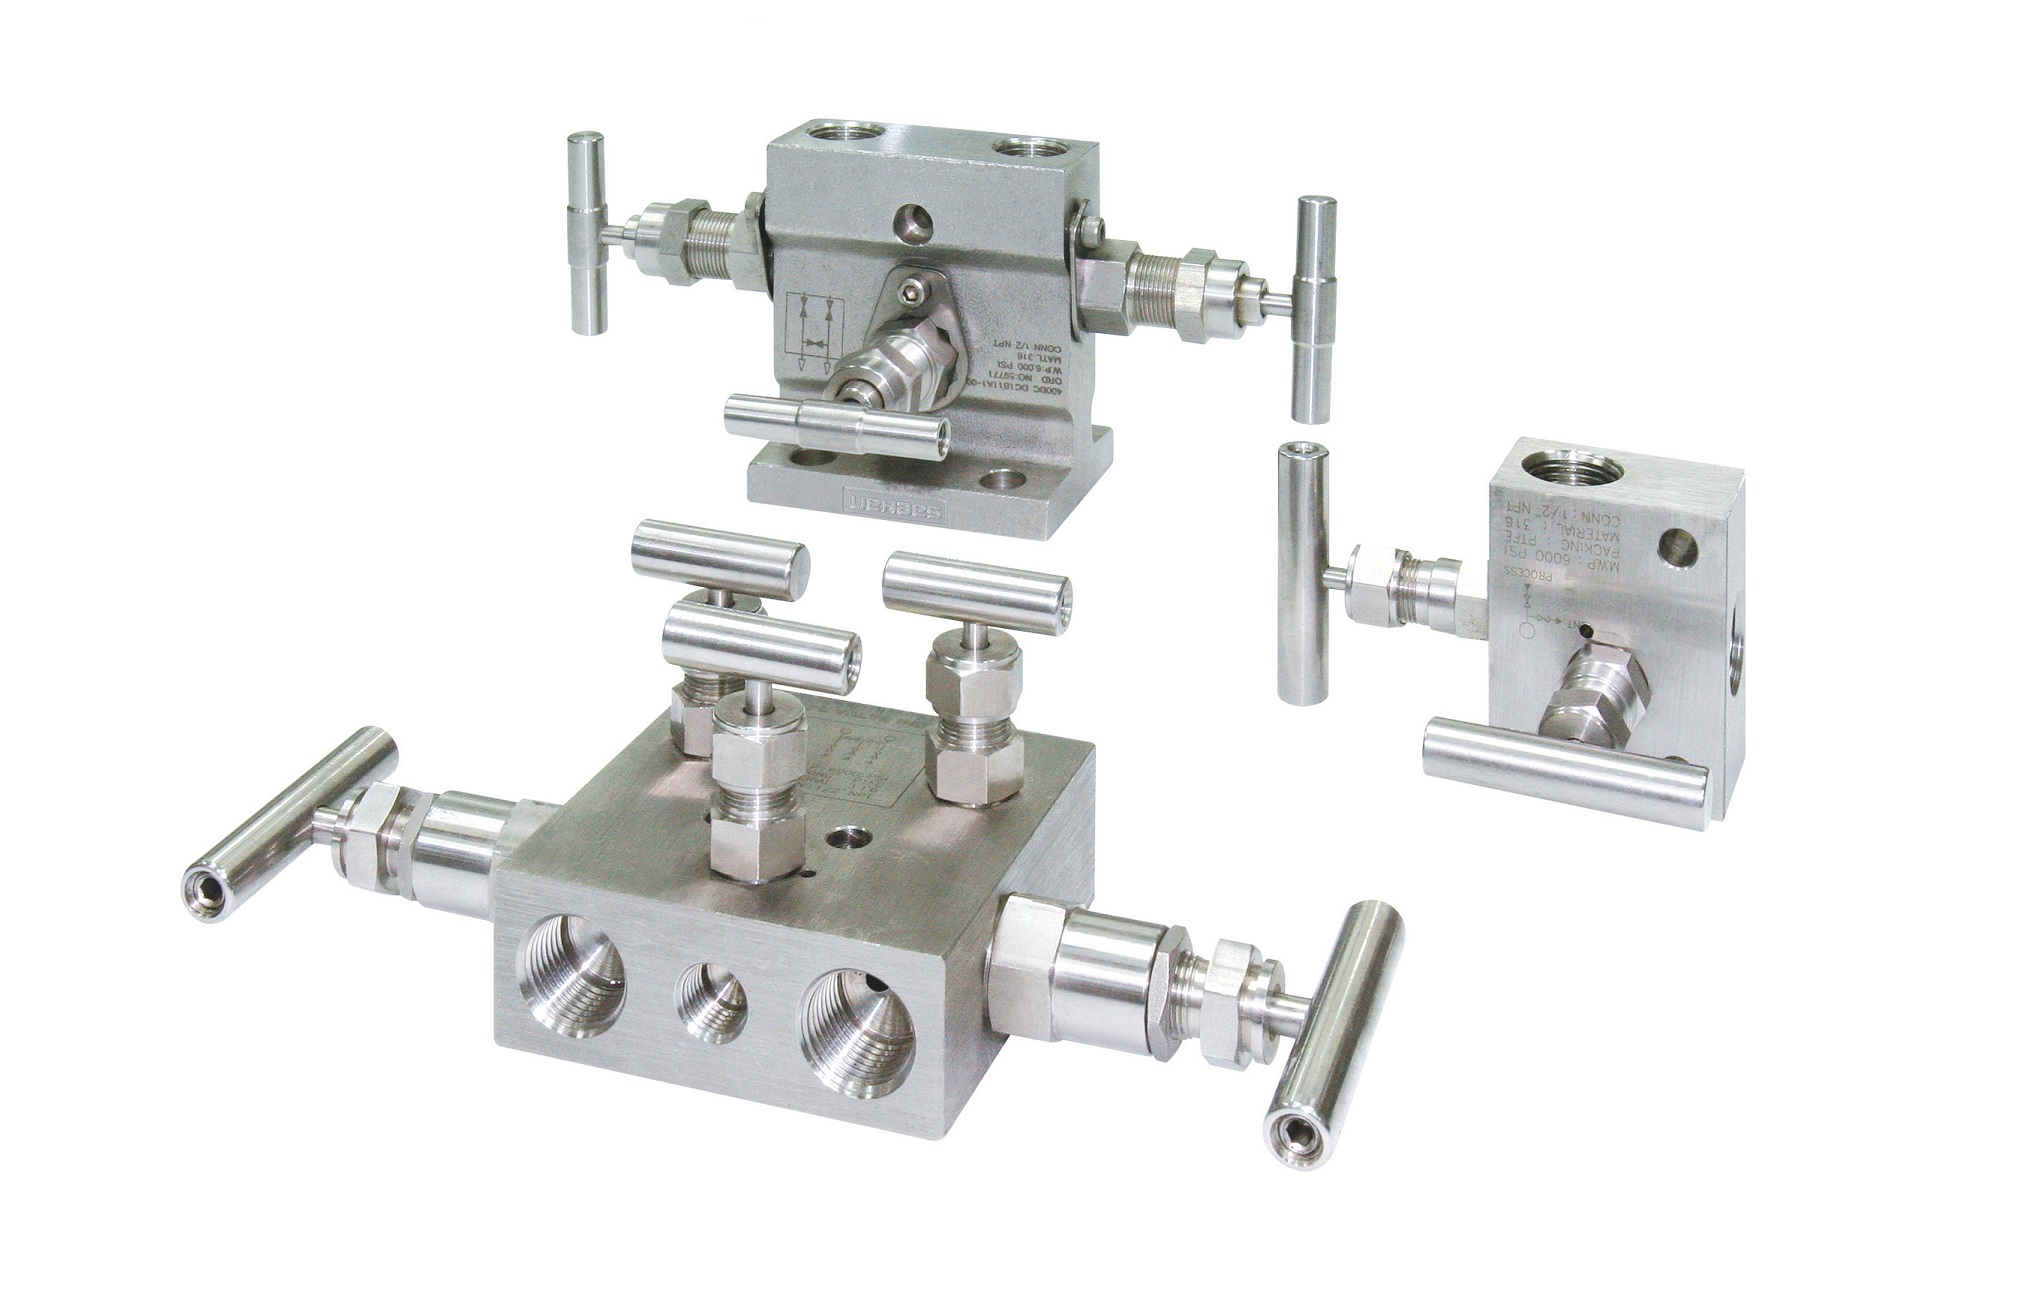 Series BBV-0  2-Valve Block Manifold is for use over a broad